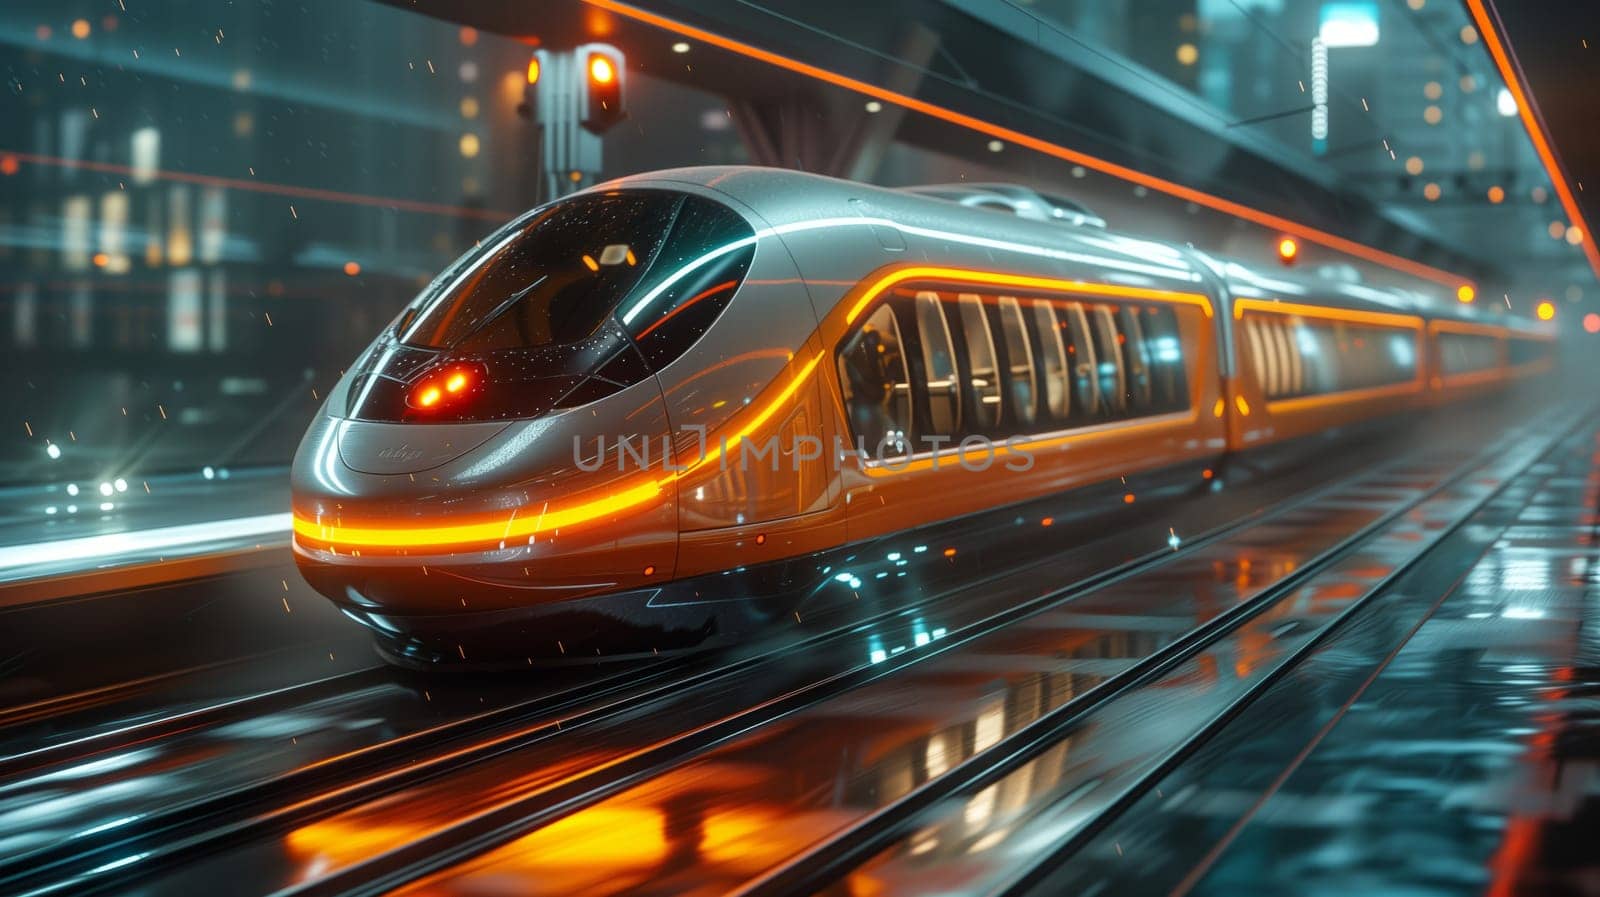 A highspeed bullet train on futuristic tracks at night, powered by electricity and equipped with automotive lighting for a smooth ride